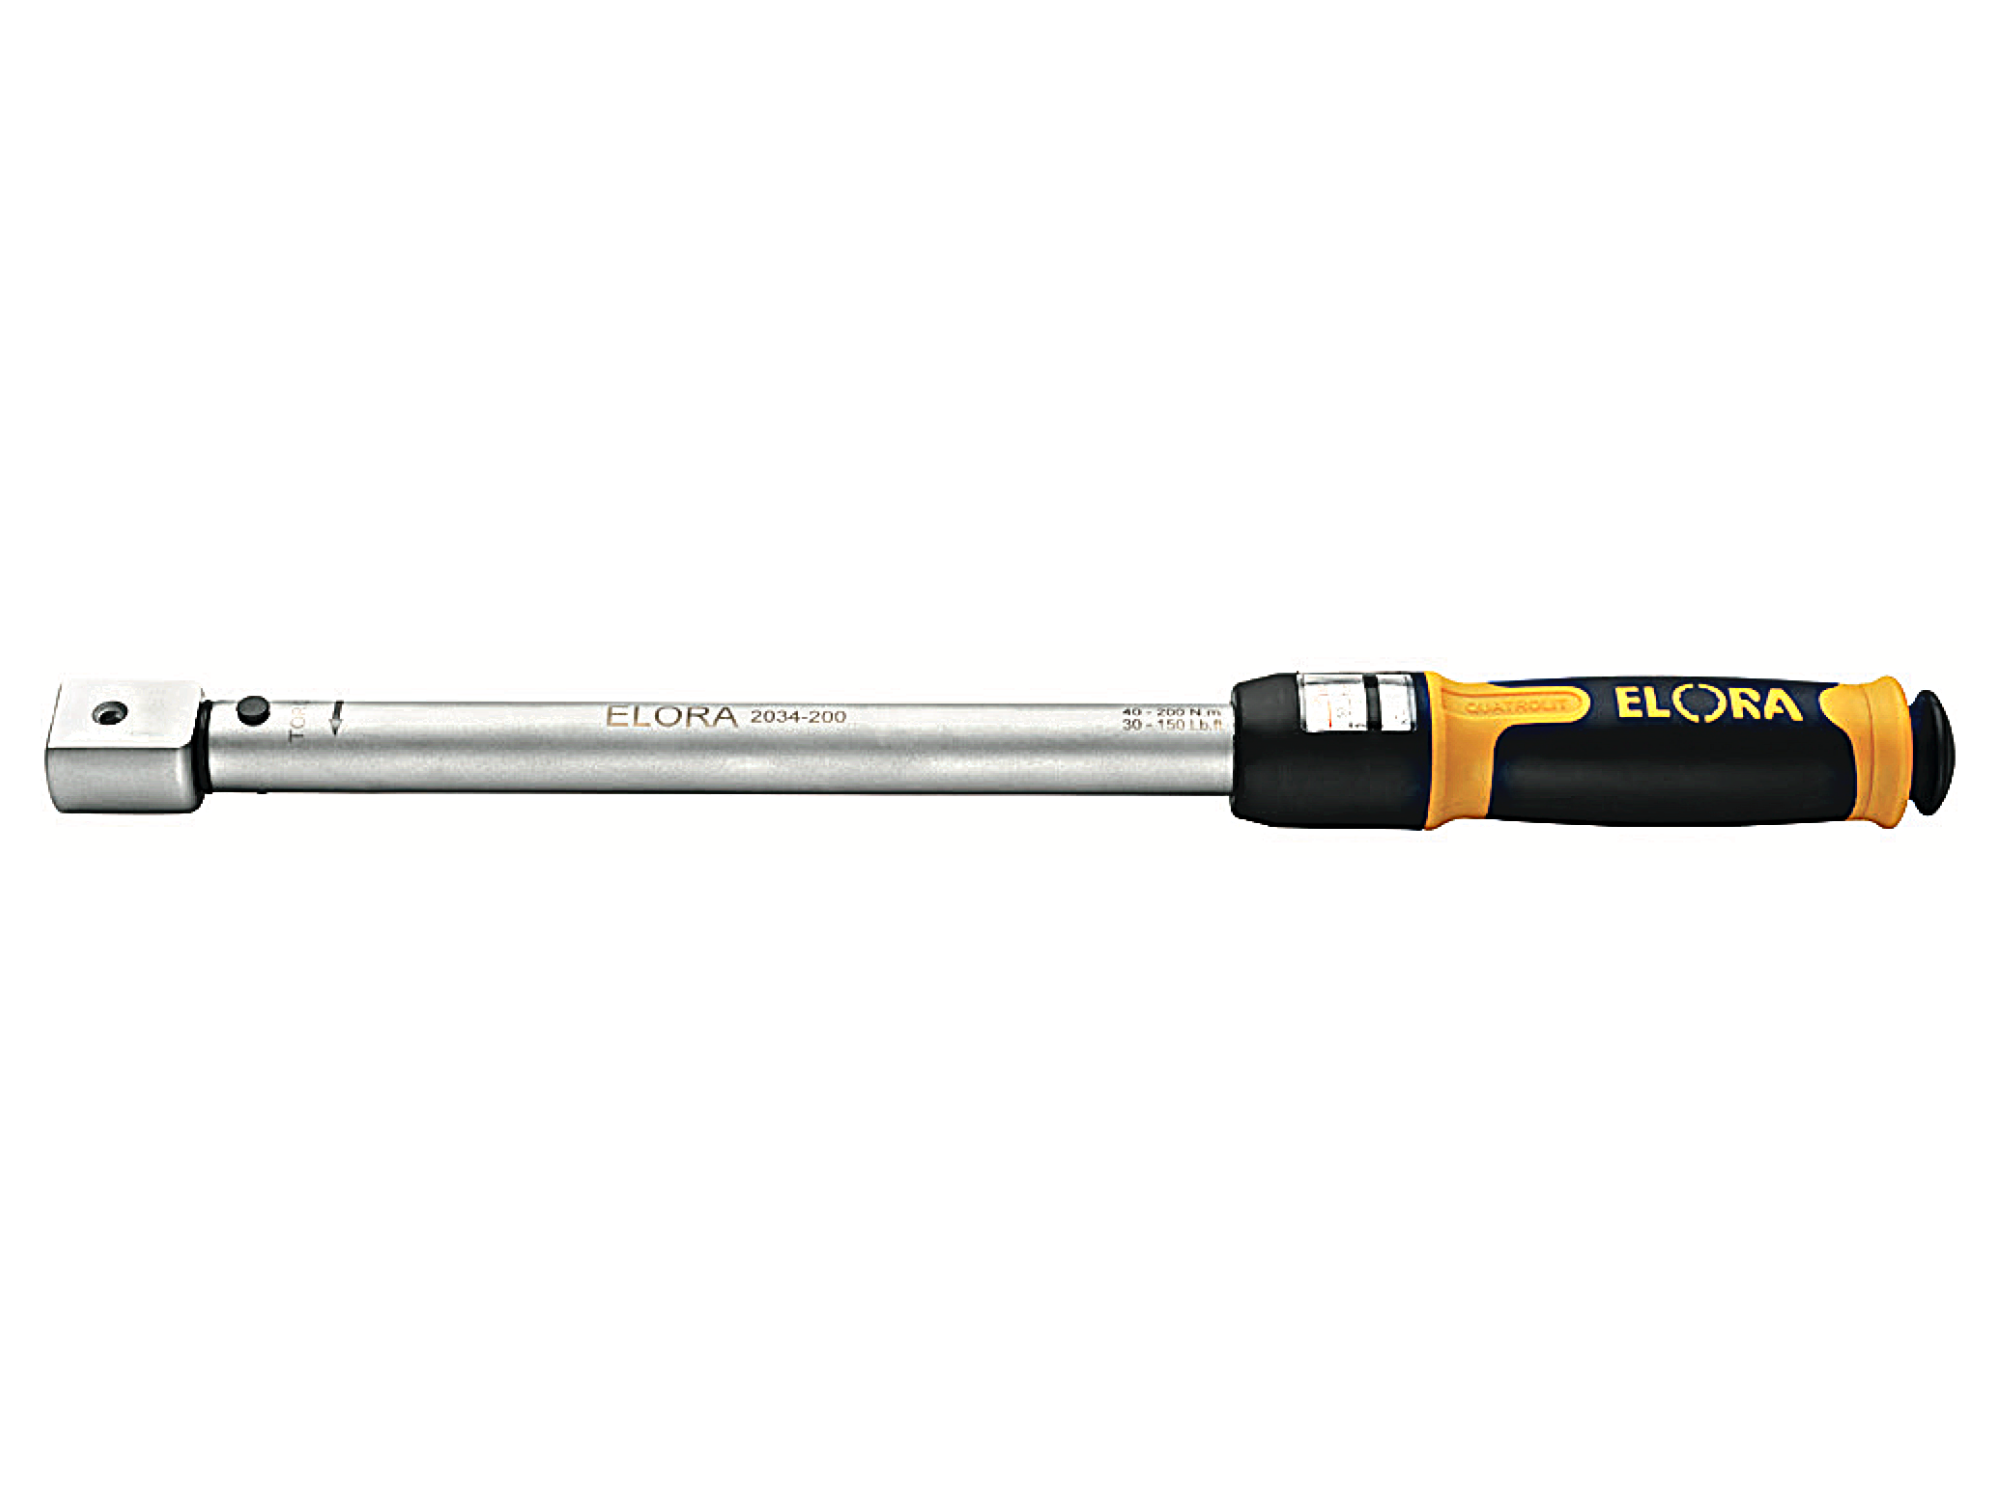 ELORA 2034-60/125 9x12mm Torque Wrench With Rectangular Intake - Premium Torque Wrench from ELORA - Shop now at Yew Aik.